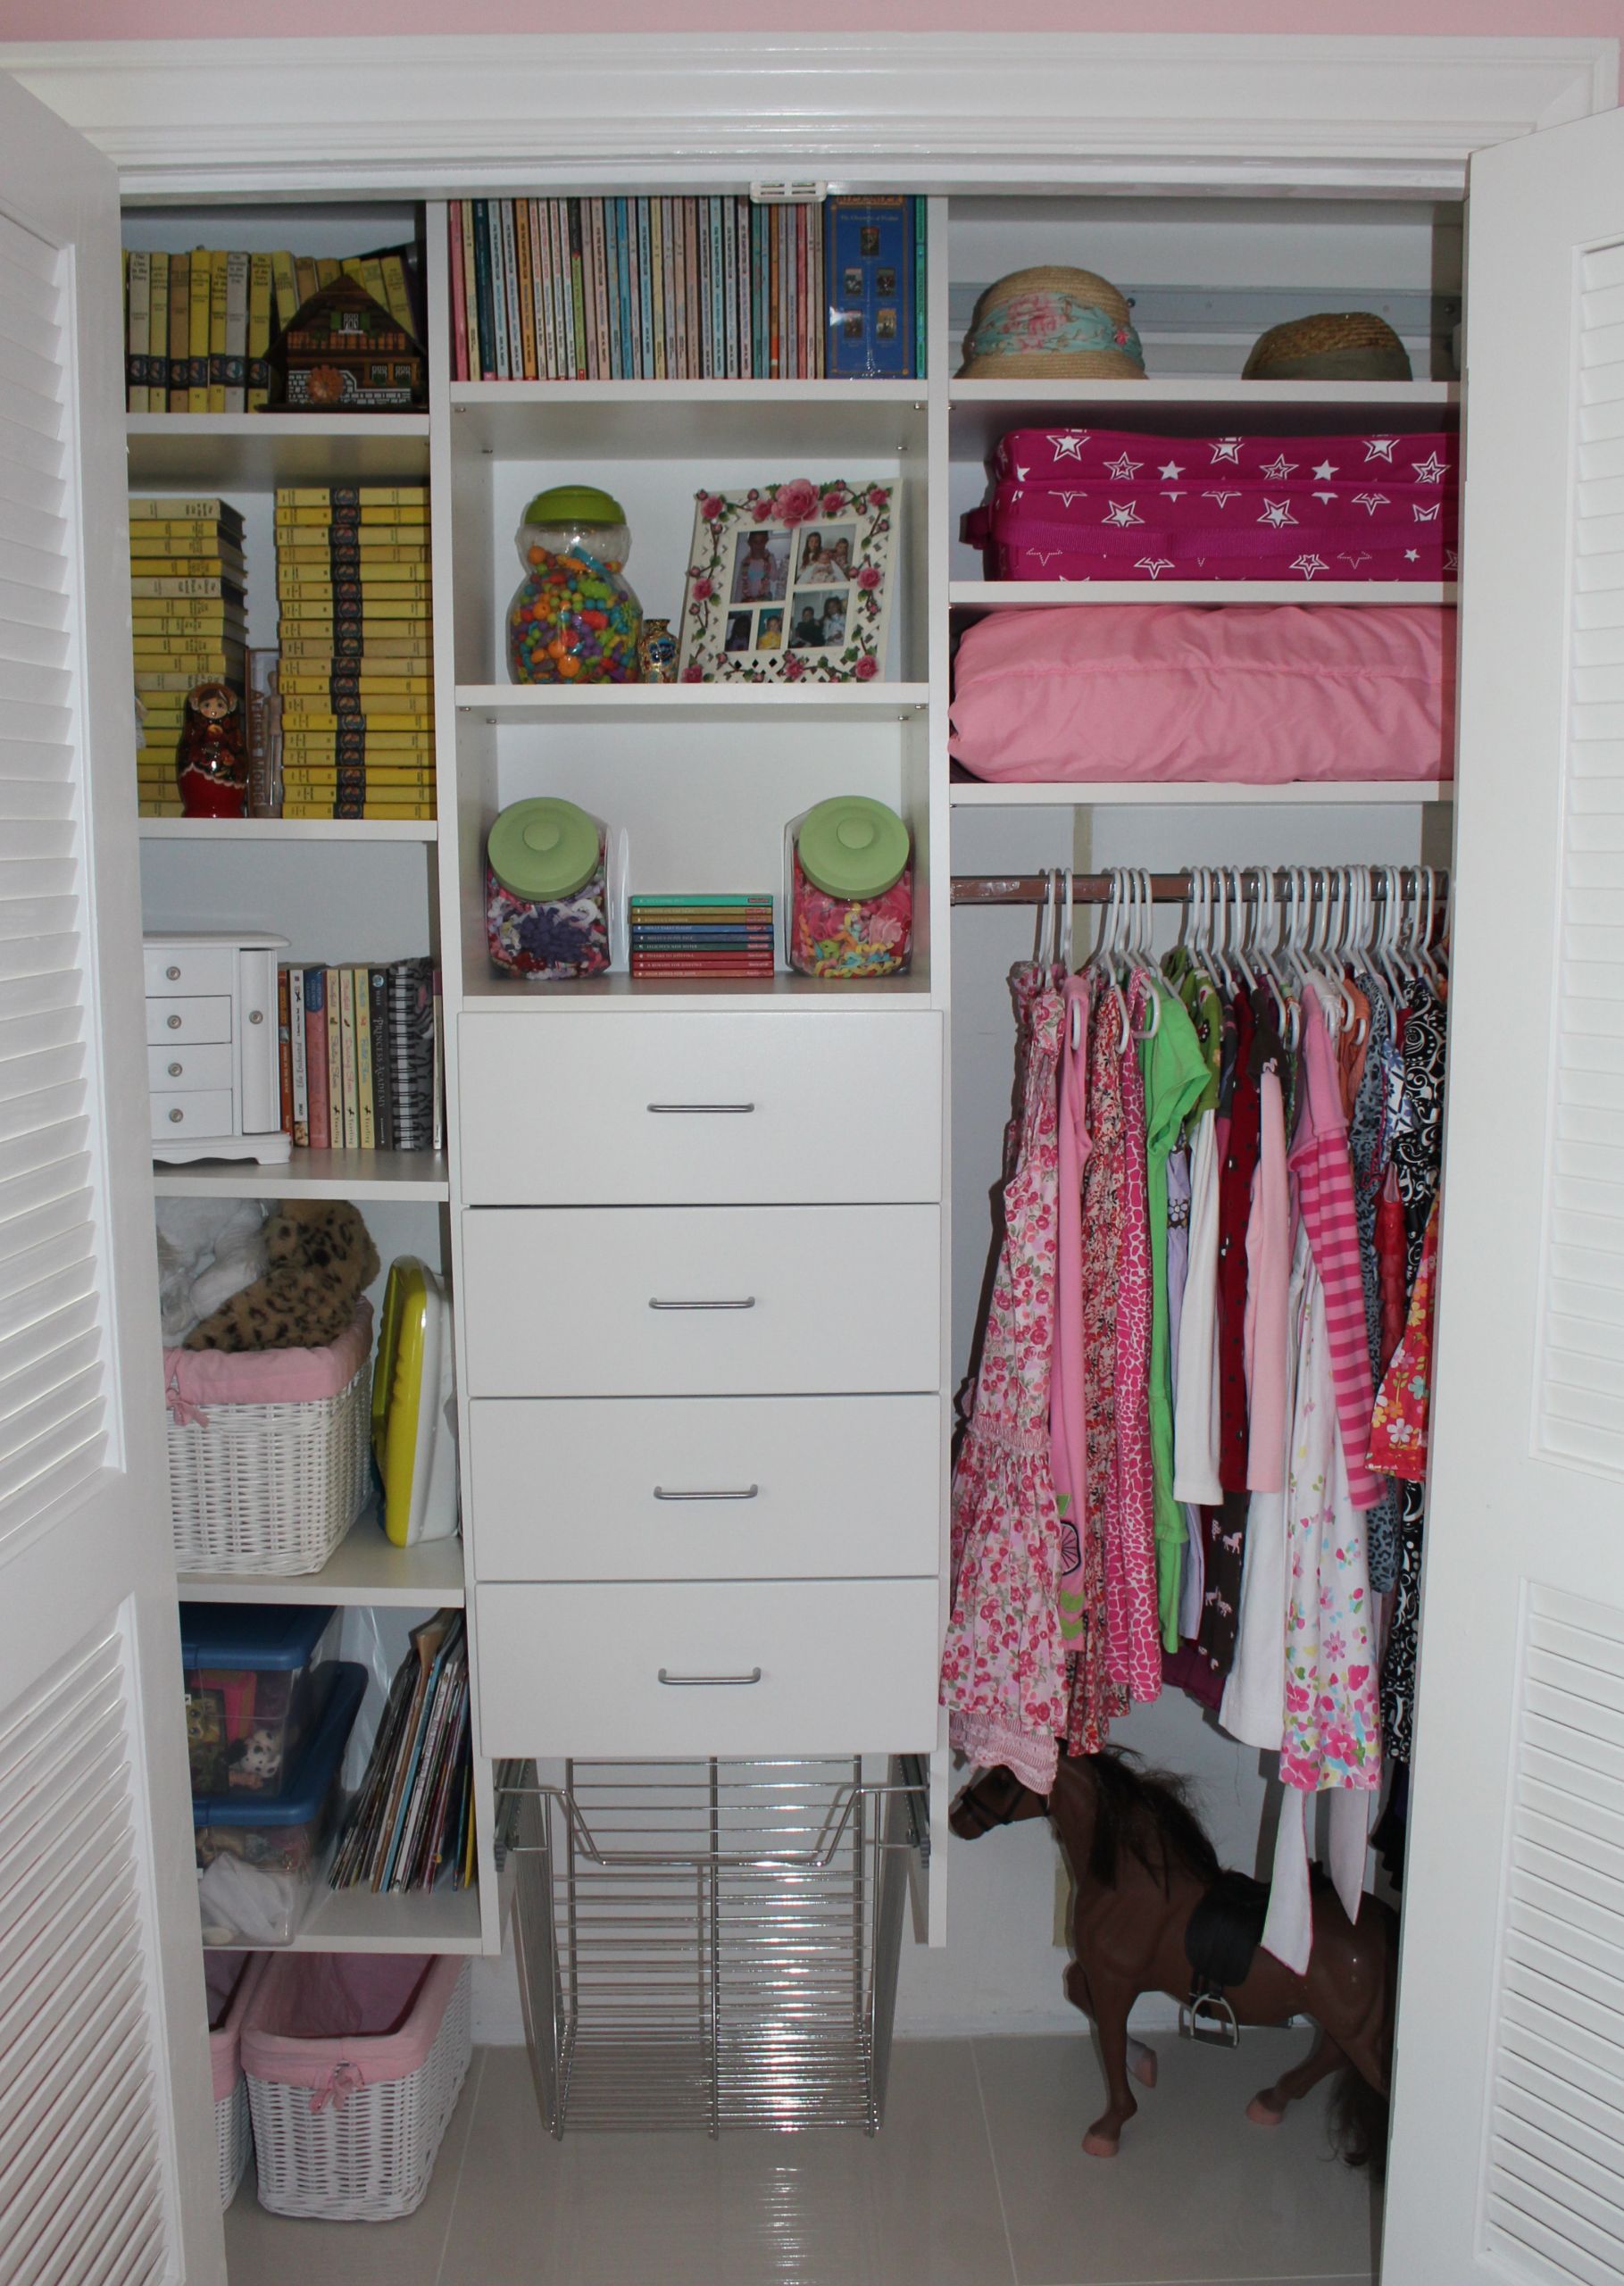 Bedroom Clothes Storage
 Closet Organizers for Small Closets – HomesFeed